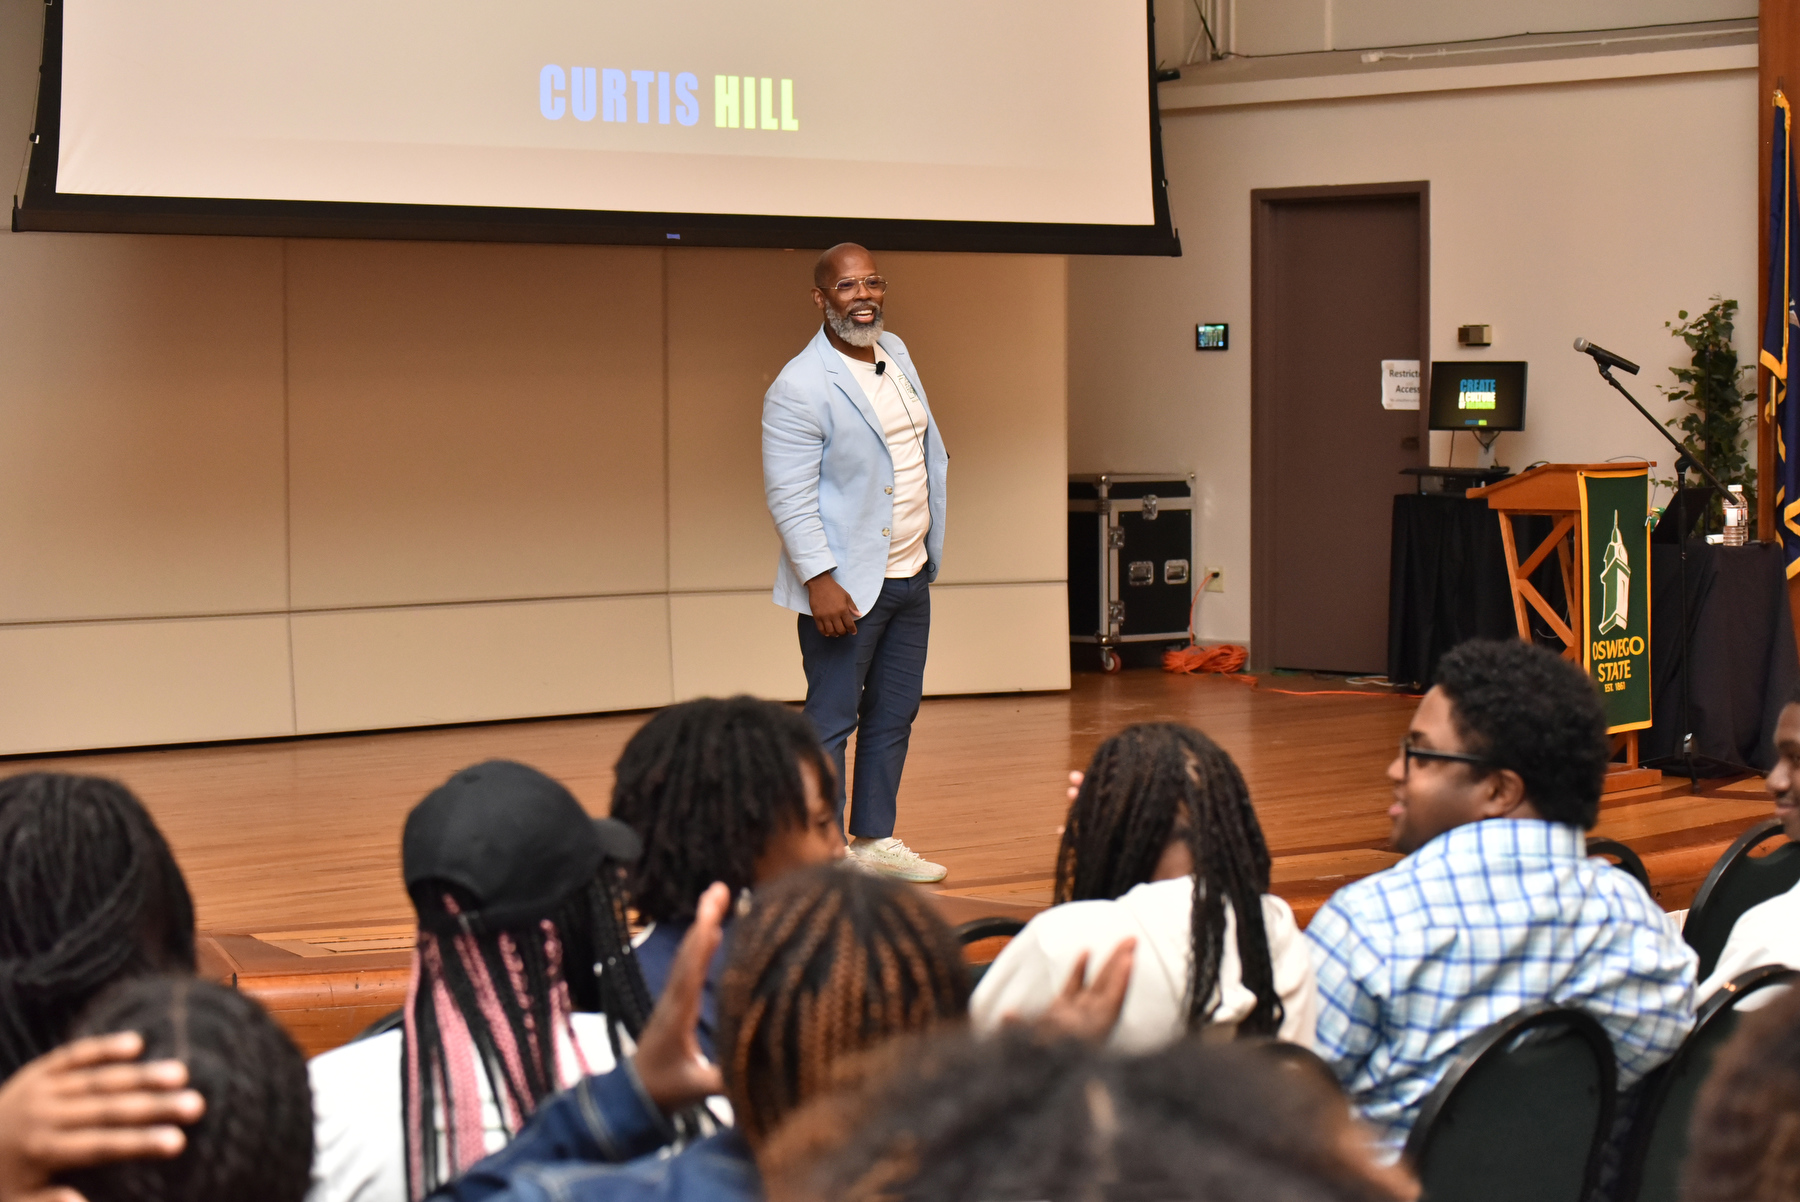 The 37th ALANA (African, Latino, Asian and Native American) Multicultural Leadership Conference featured an opening keynote by Curtis Hill on diversity, equity and inclusion and on leadership, on Sept. 28 in the Sheldon Hall ballroom. 